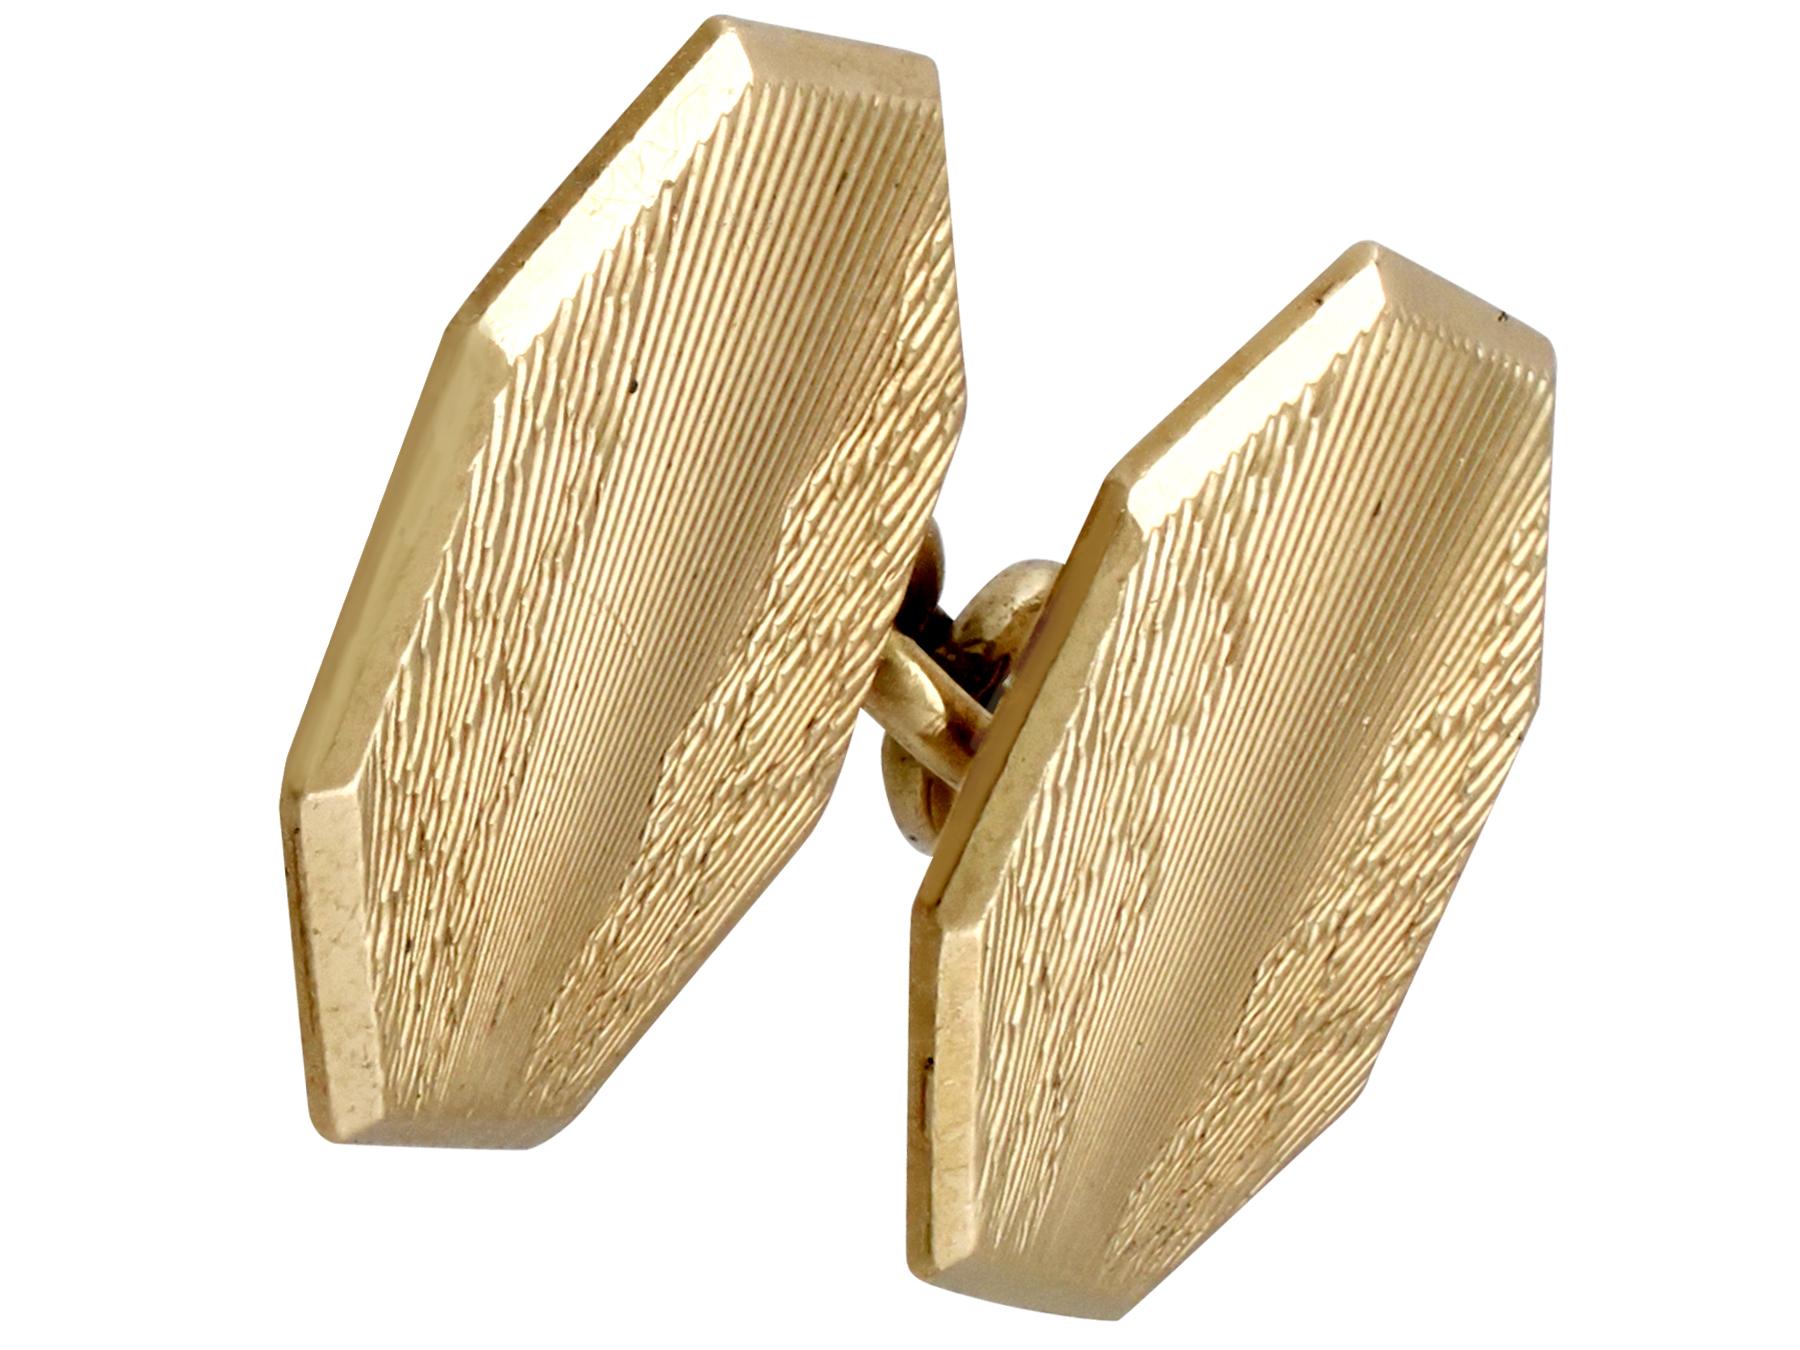 Antique Art Deco 1929 Yellow Gold Cufflinks In Excellent Condition For Sale In Jesmond, Newcastle Upon Tyne